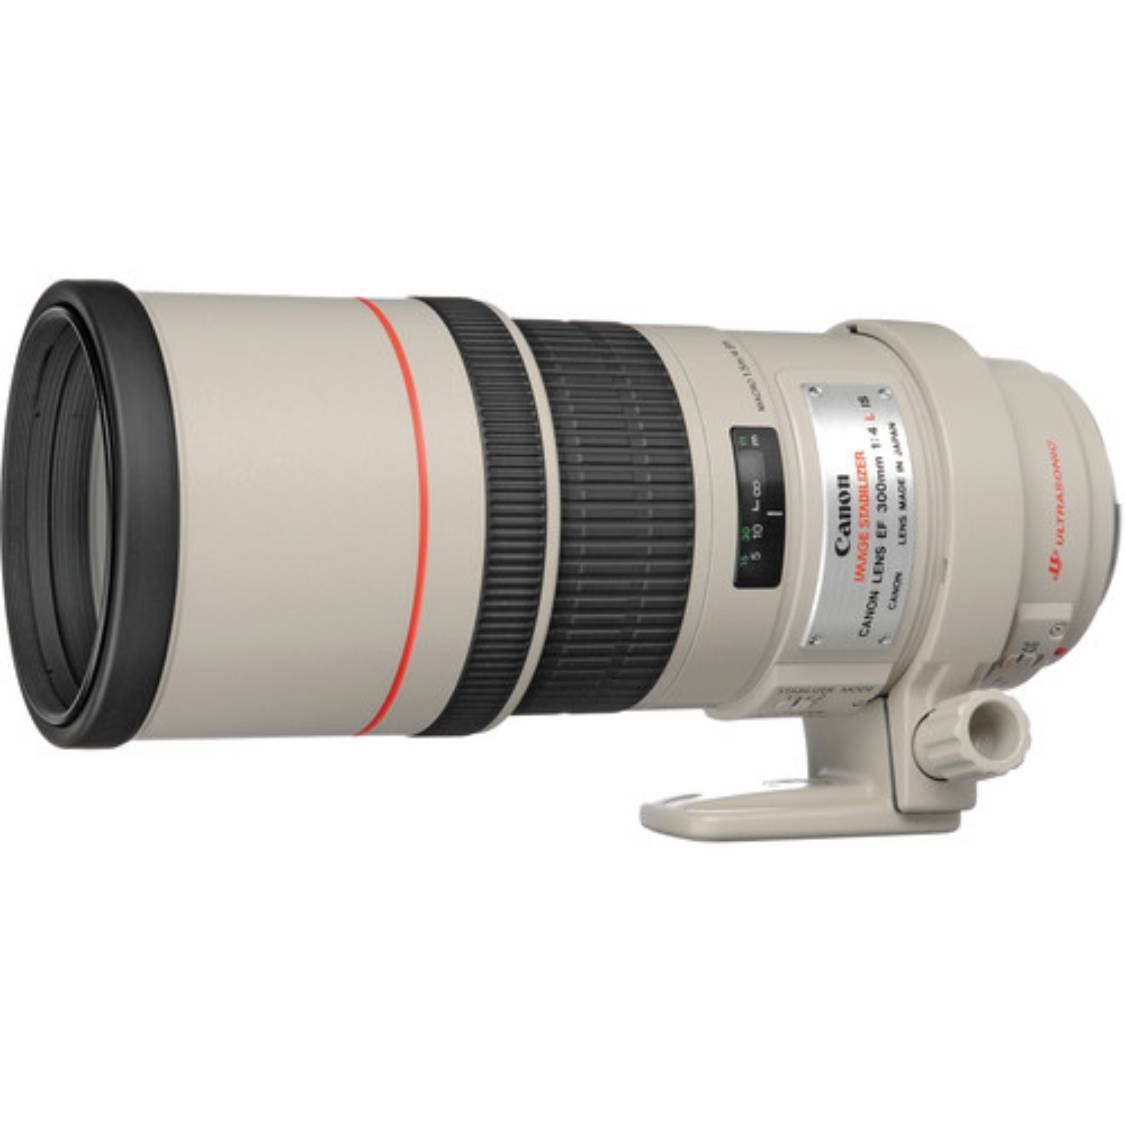 Canon EF 300mm F4.0L IS USM Lens - Open Box